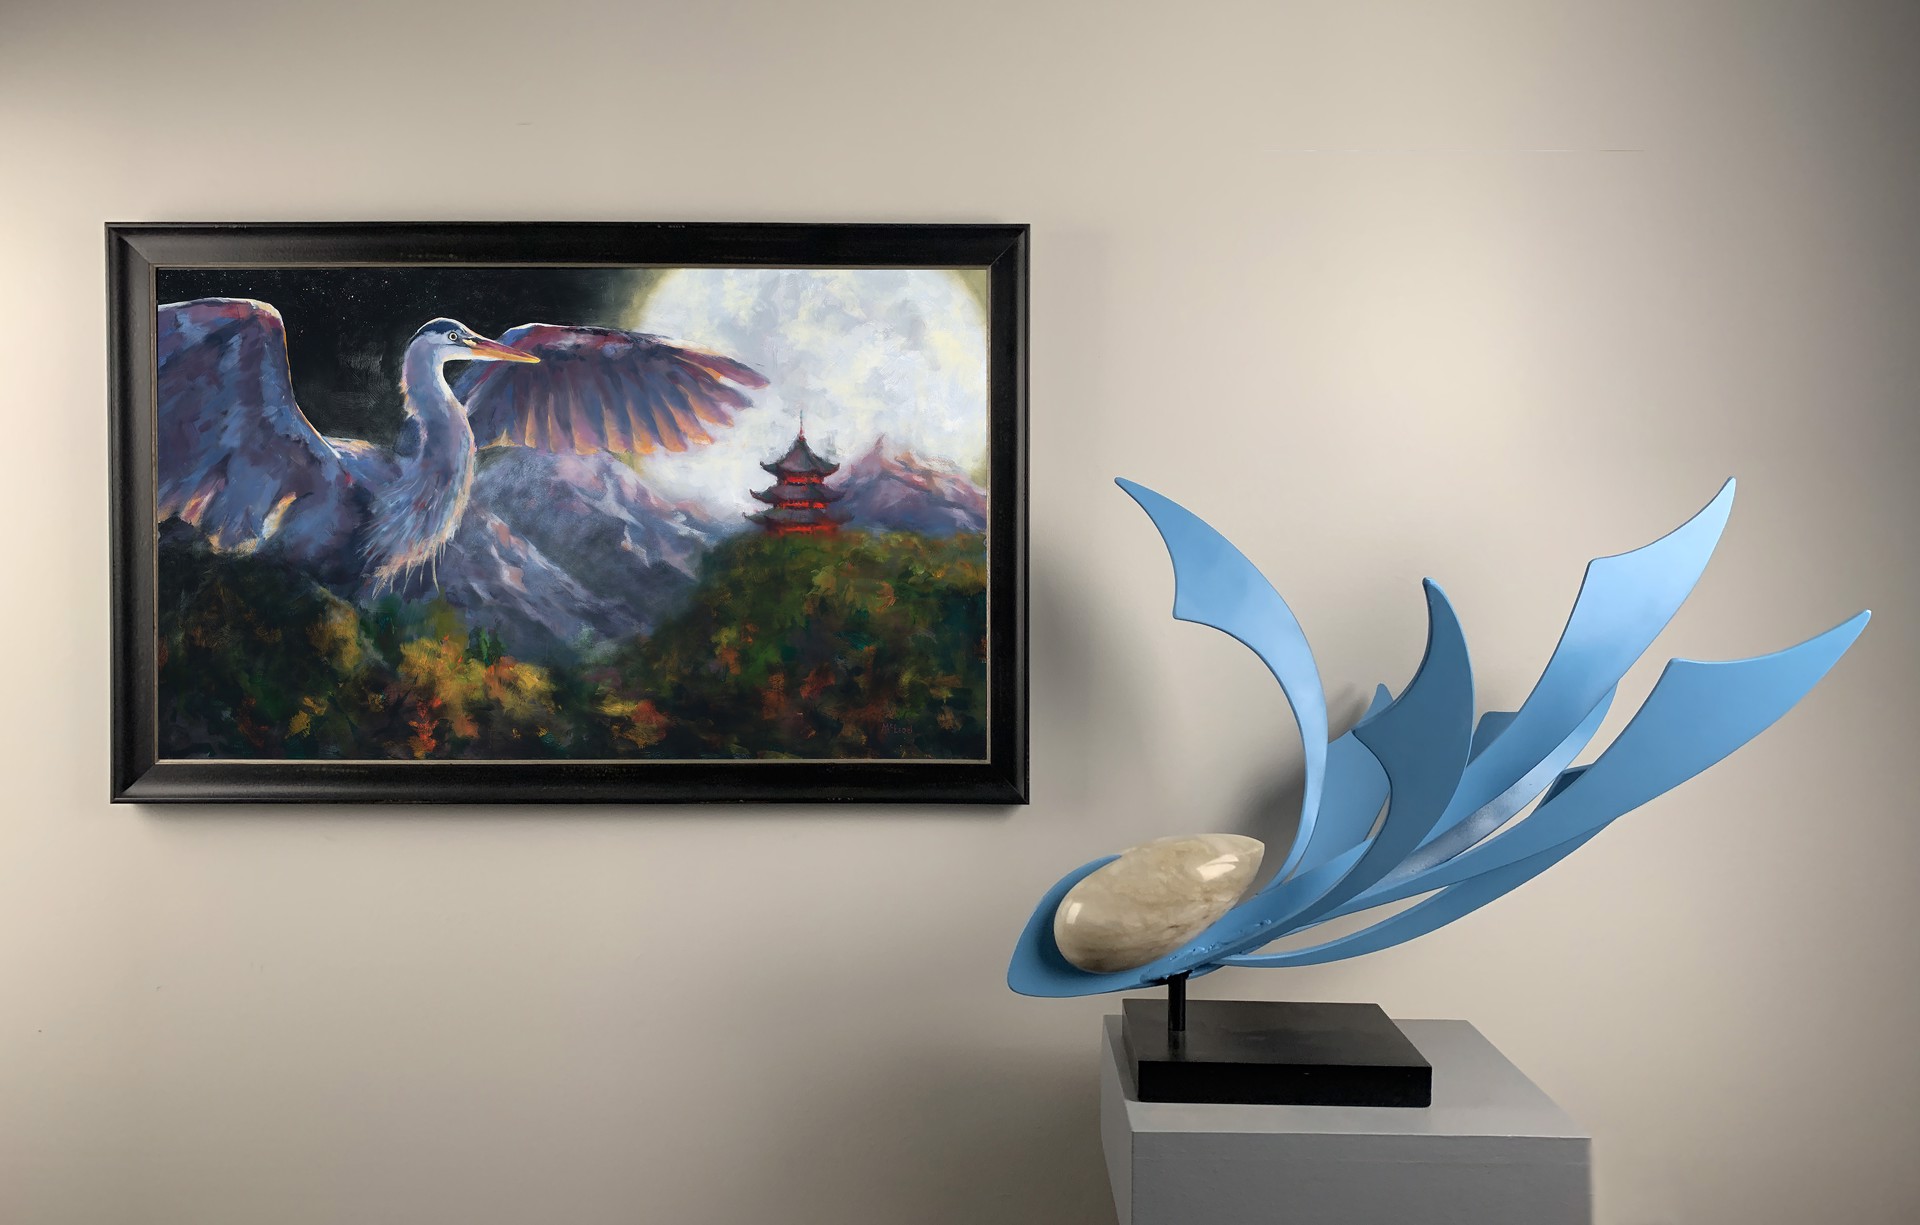 An image depicting a sculpture and painting by fine artist John McLeod.